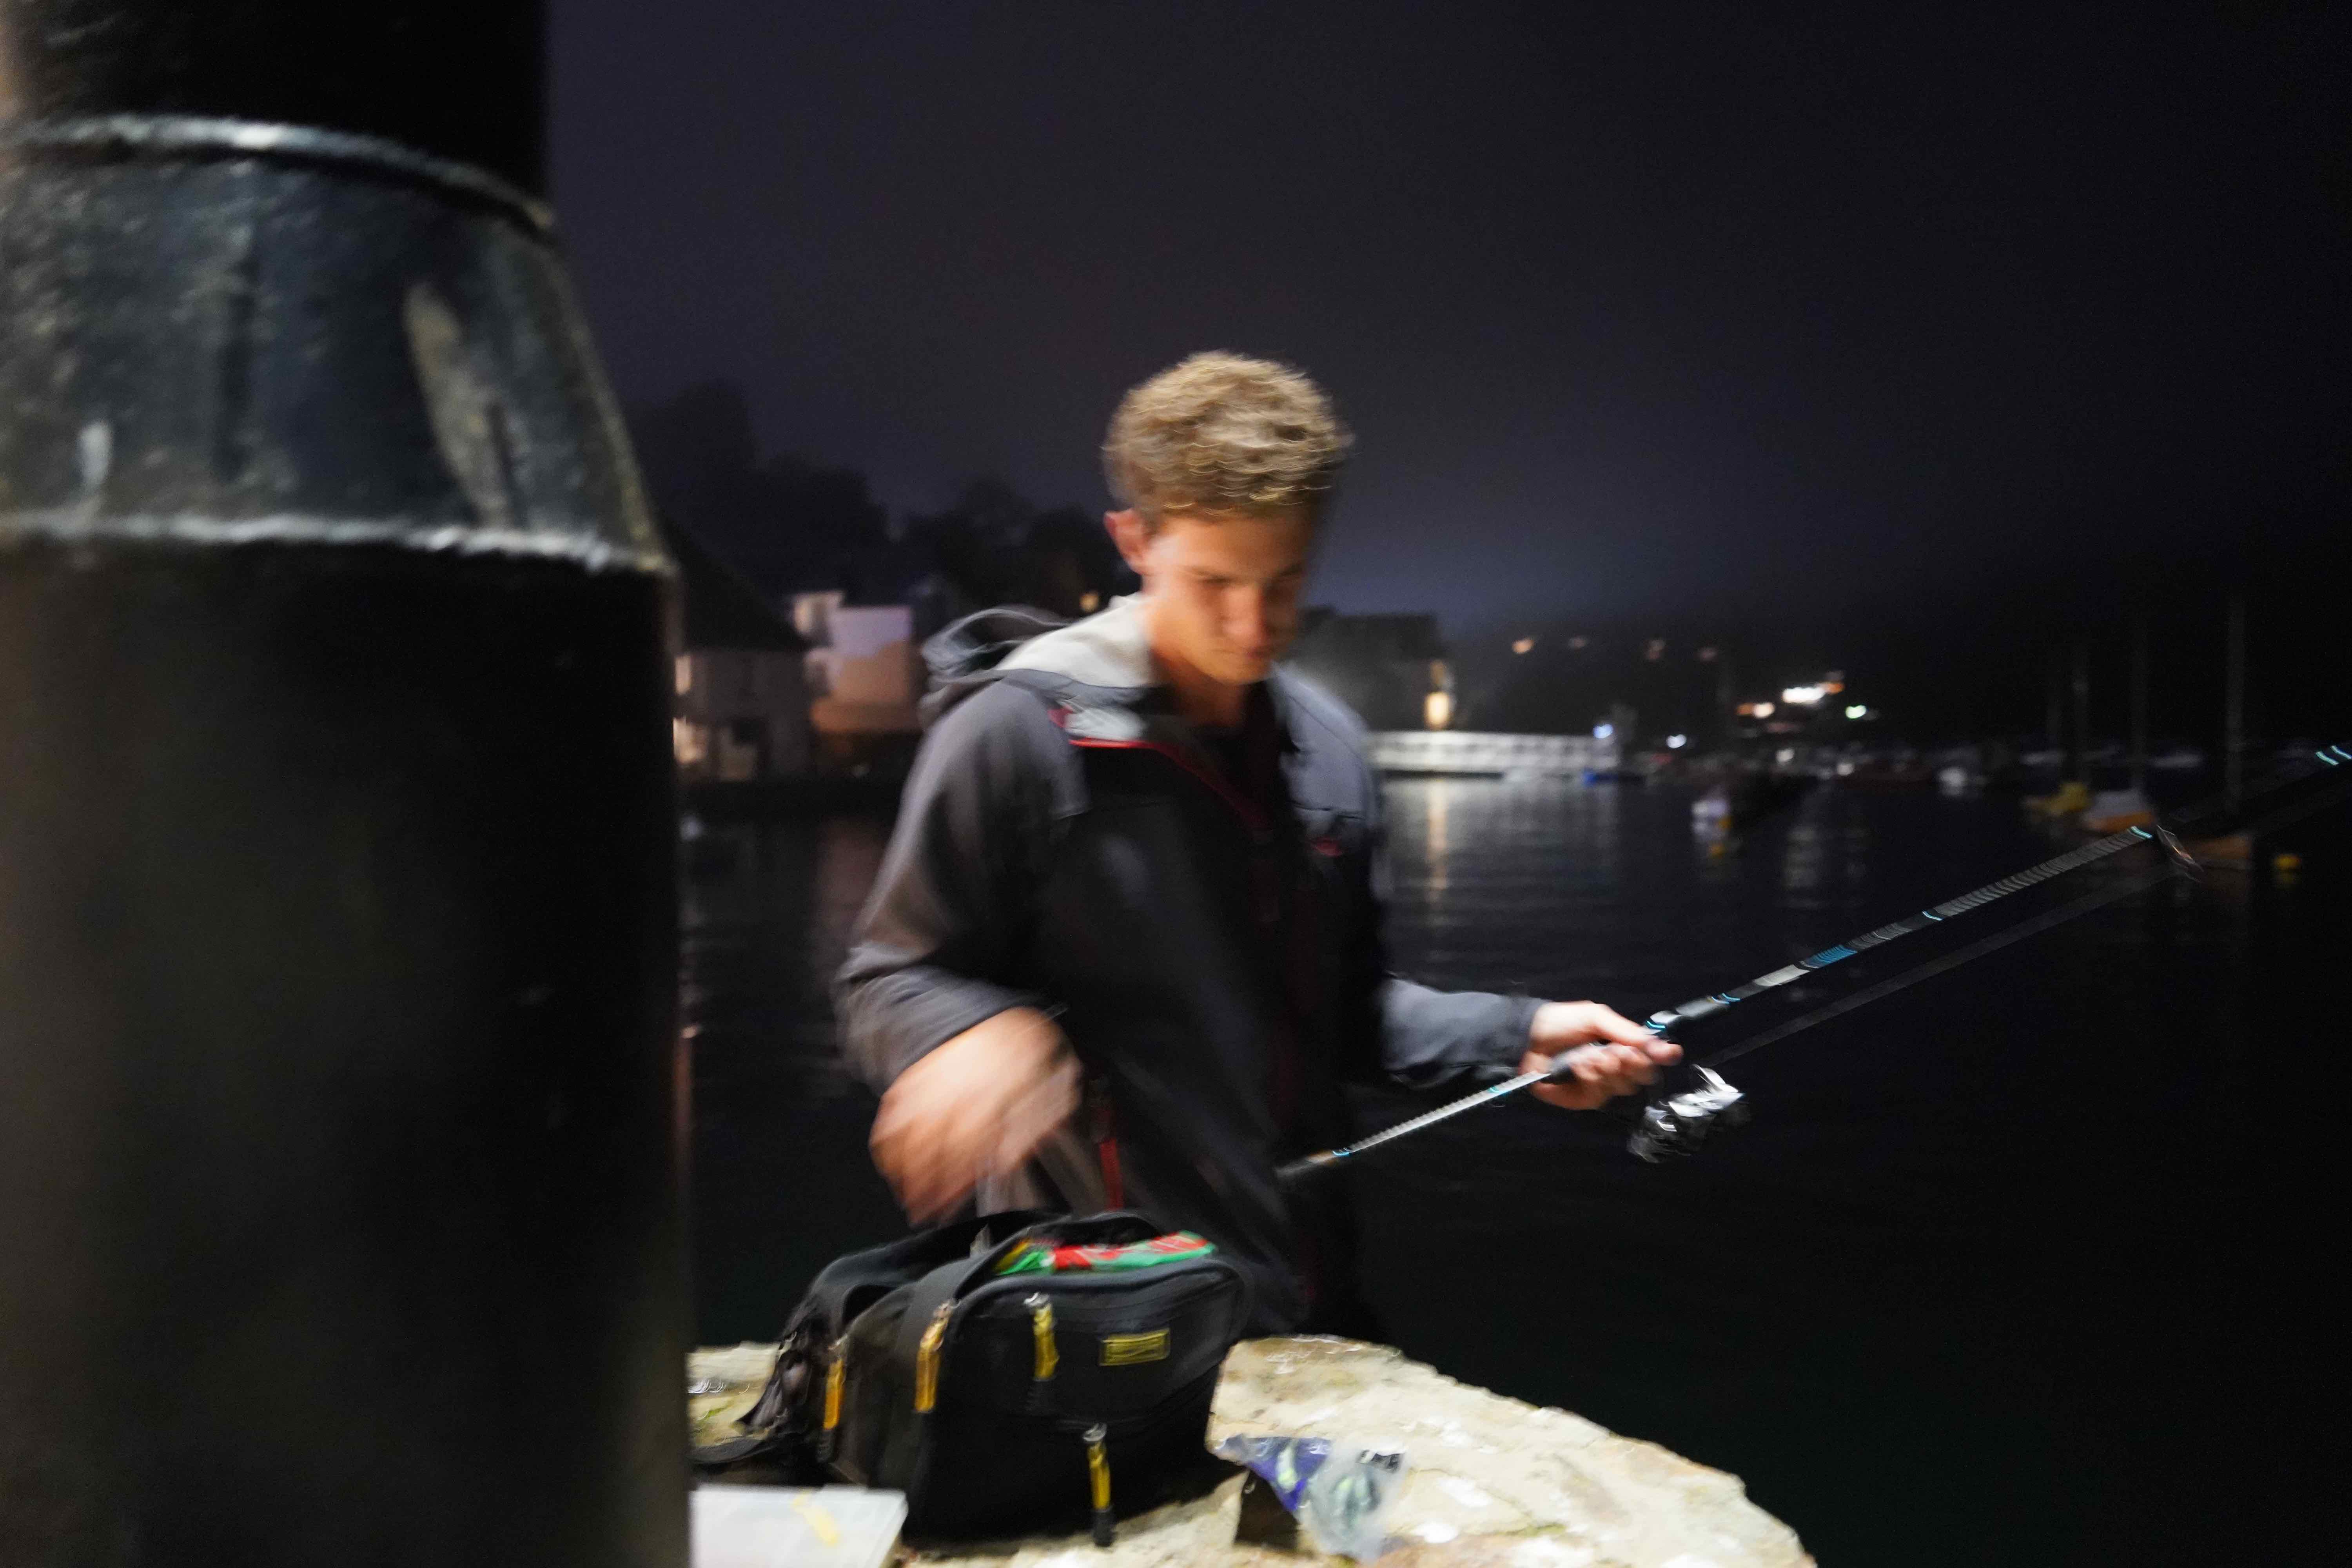 lure fishing at night from a jetty